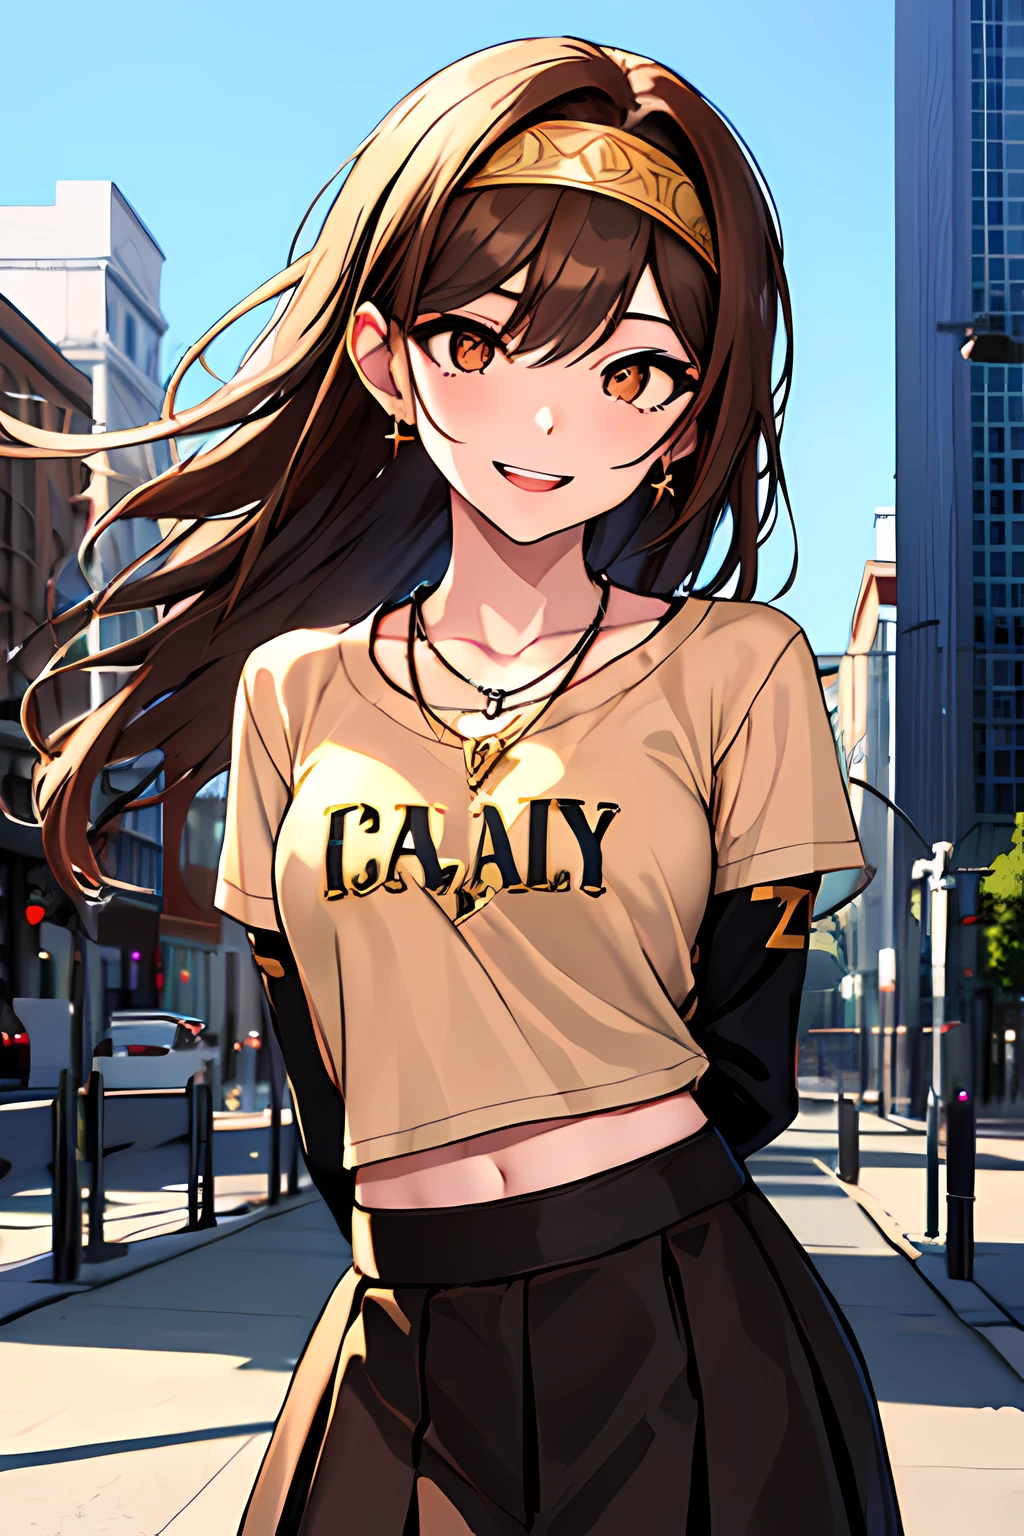 (masterpiece), best quality, expressive eyes, highres, perfect eyes, perfect face, perfect hands, 1girl, genie, zodiac, shirt over 1 shoulder, Brown bikini, long sleeves, necklace, long Brown Hair, city background, headband, Brown eyes, Brown skirt, small bust, rings, bracelets, charismatic, crazy face, crazy eyes, crazy smile, perfect anatomy, half body, l1girl, solo, brown shirt, gold letters, graphic t-shirt, bracelets, rings, necklace, jewelry, arm sleeves, fingerless gloves, manipulative, gaslighting, friendly, hands behind back